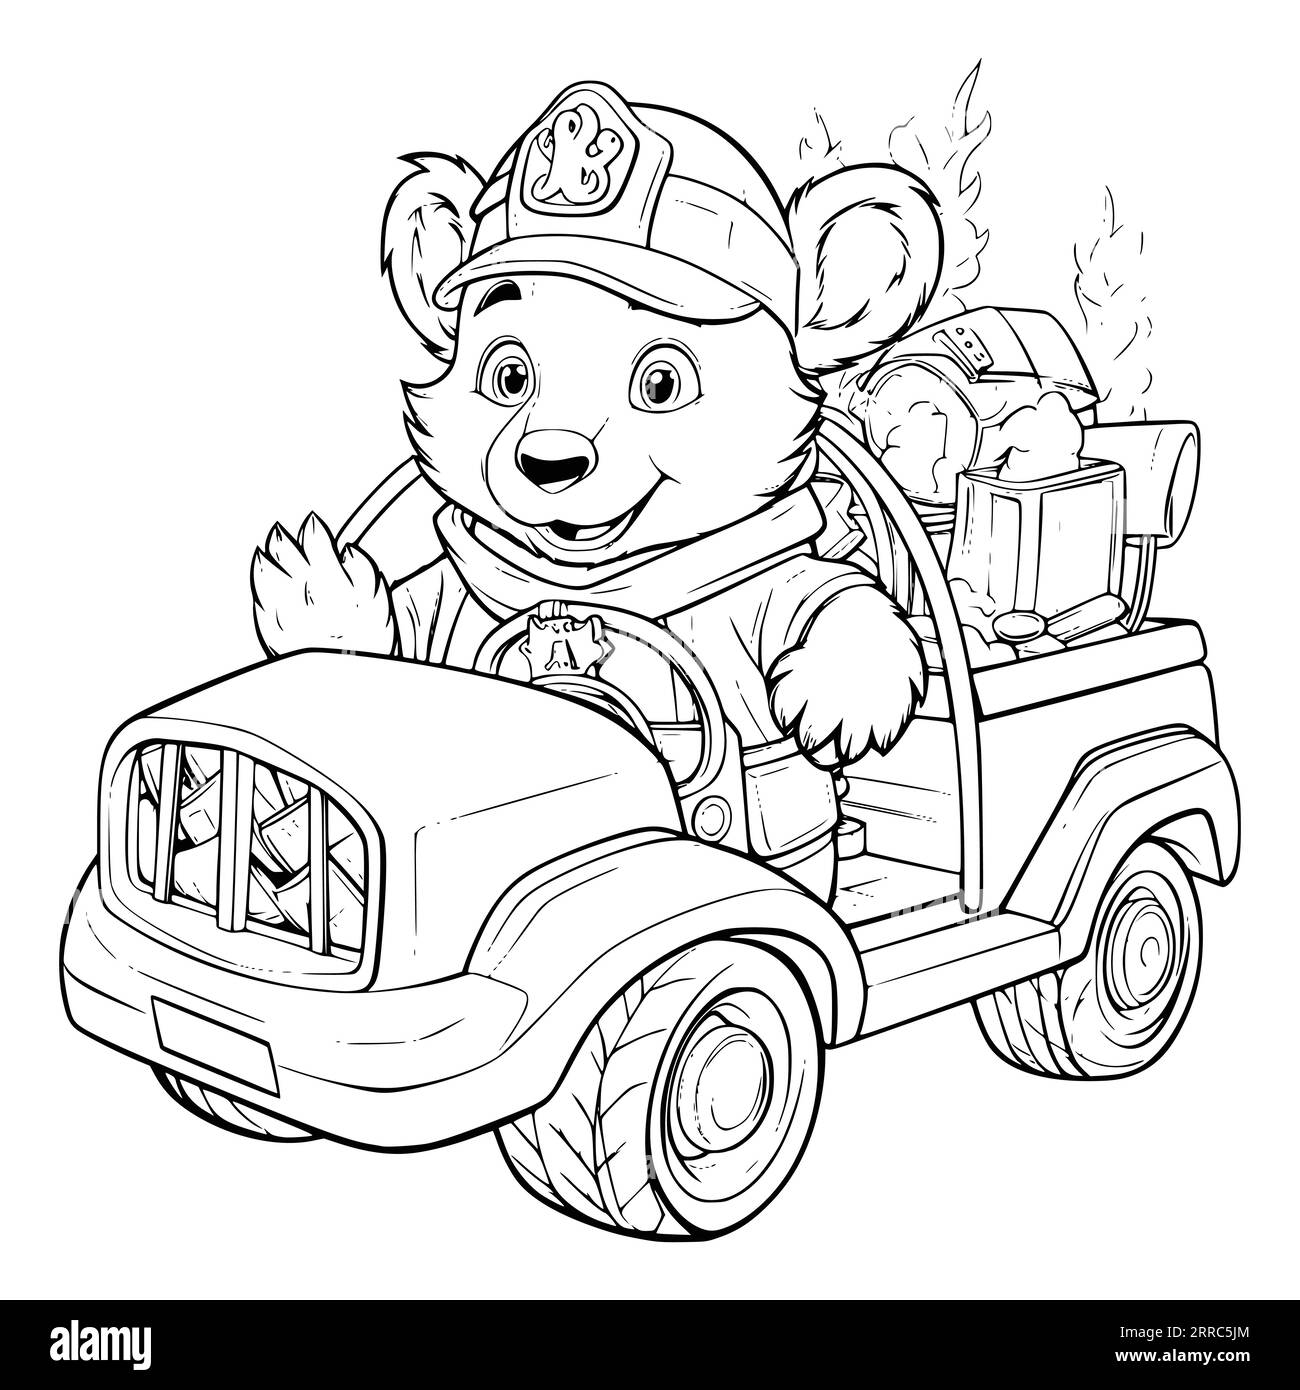 Bear driving firetruck coloring page for kids stock vector image art